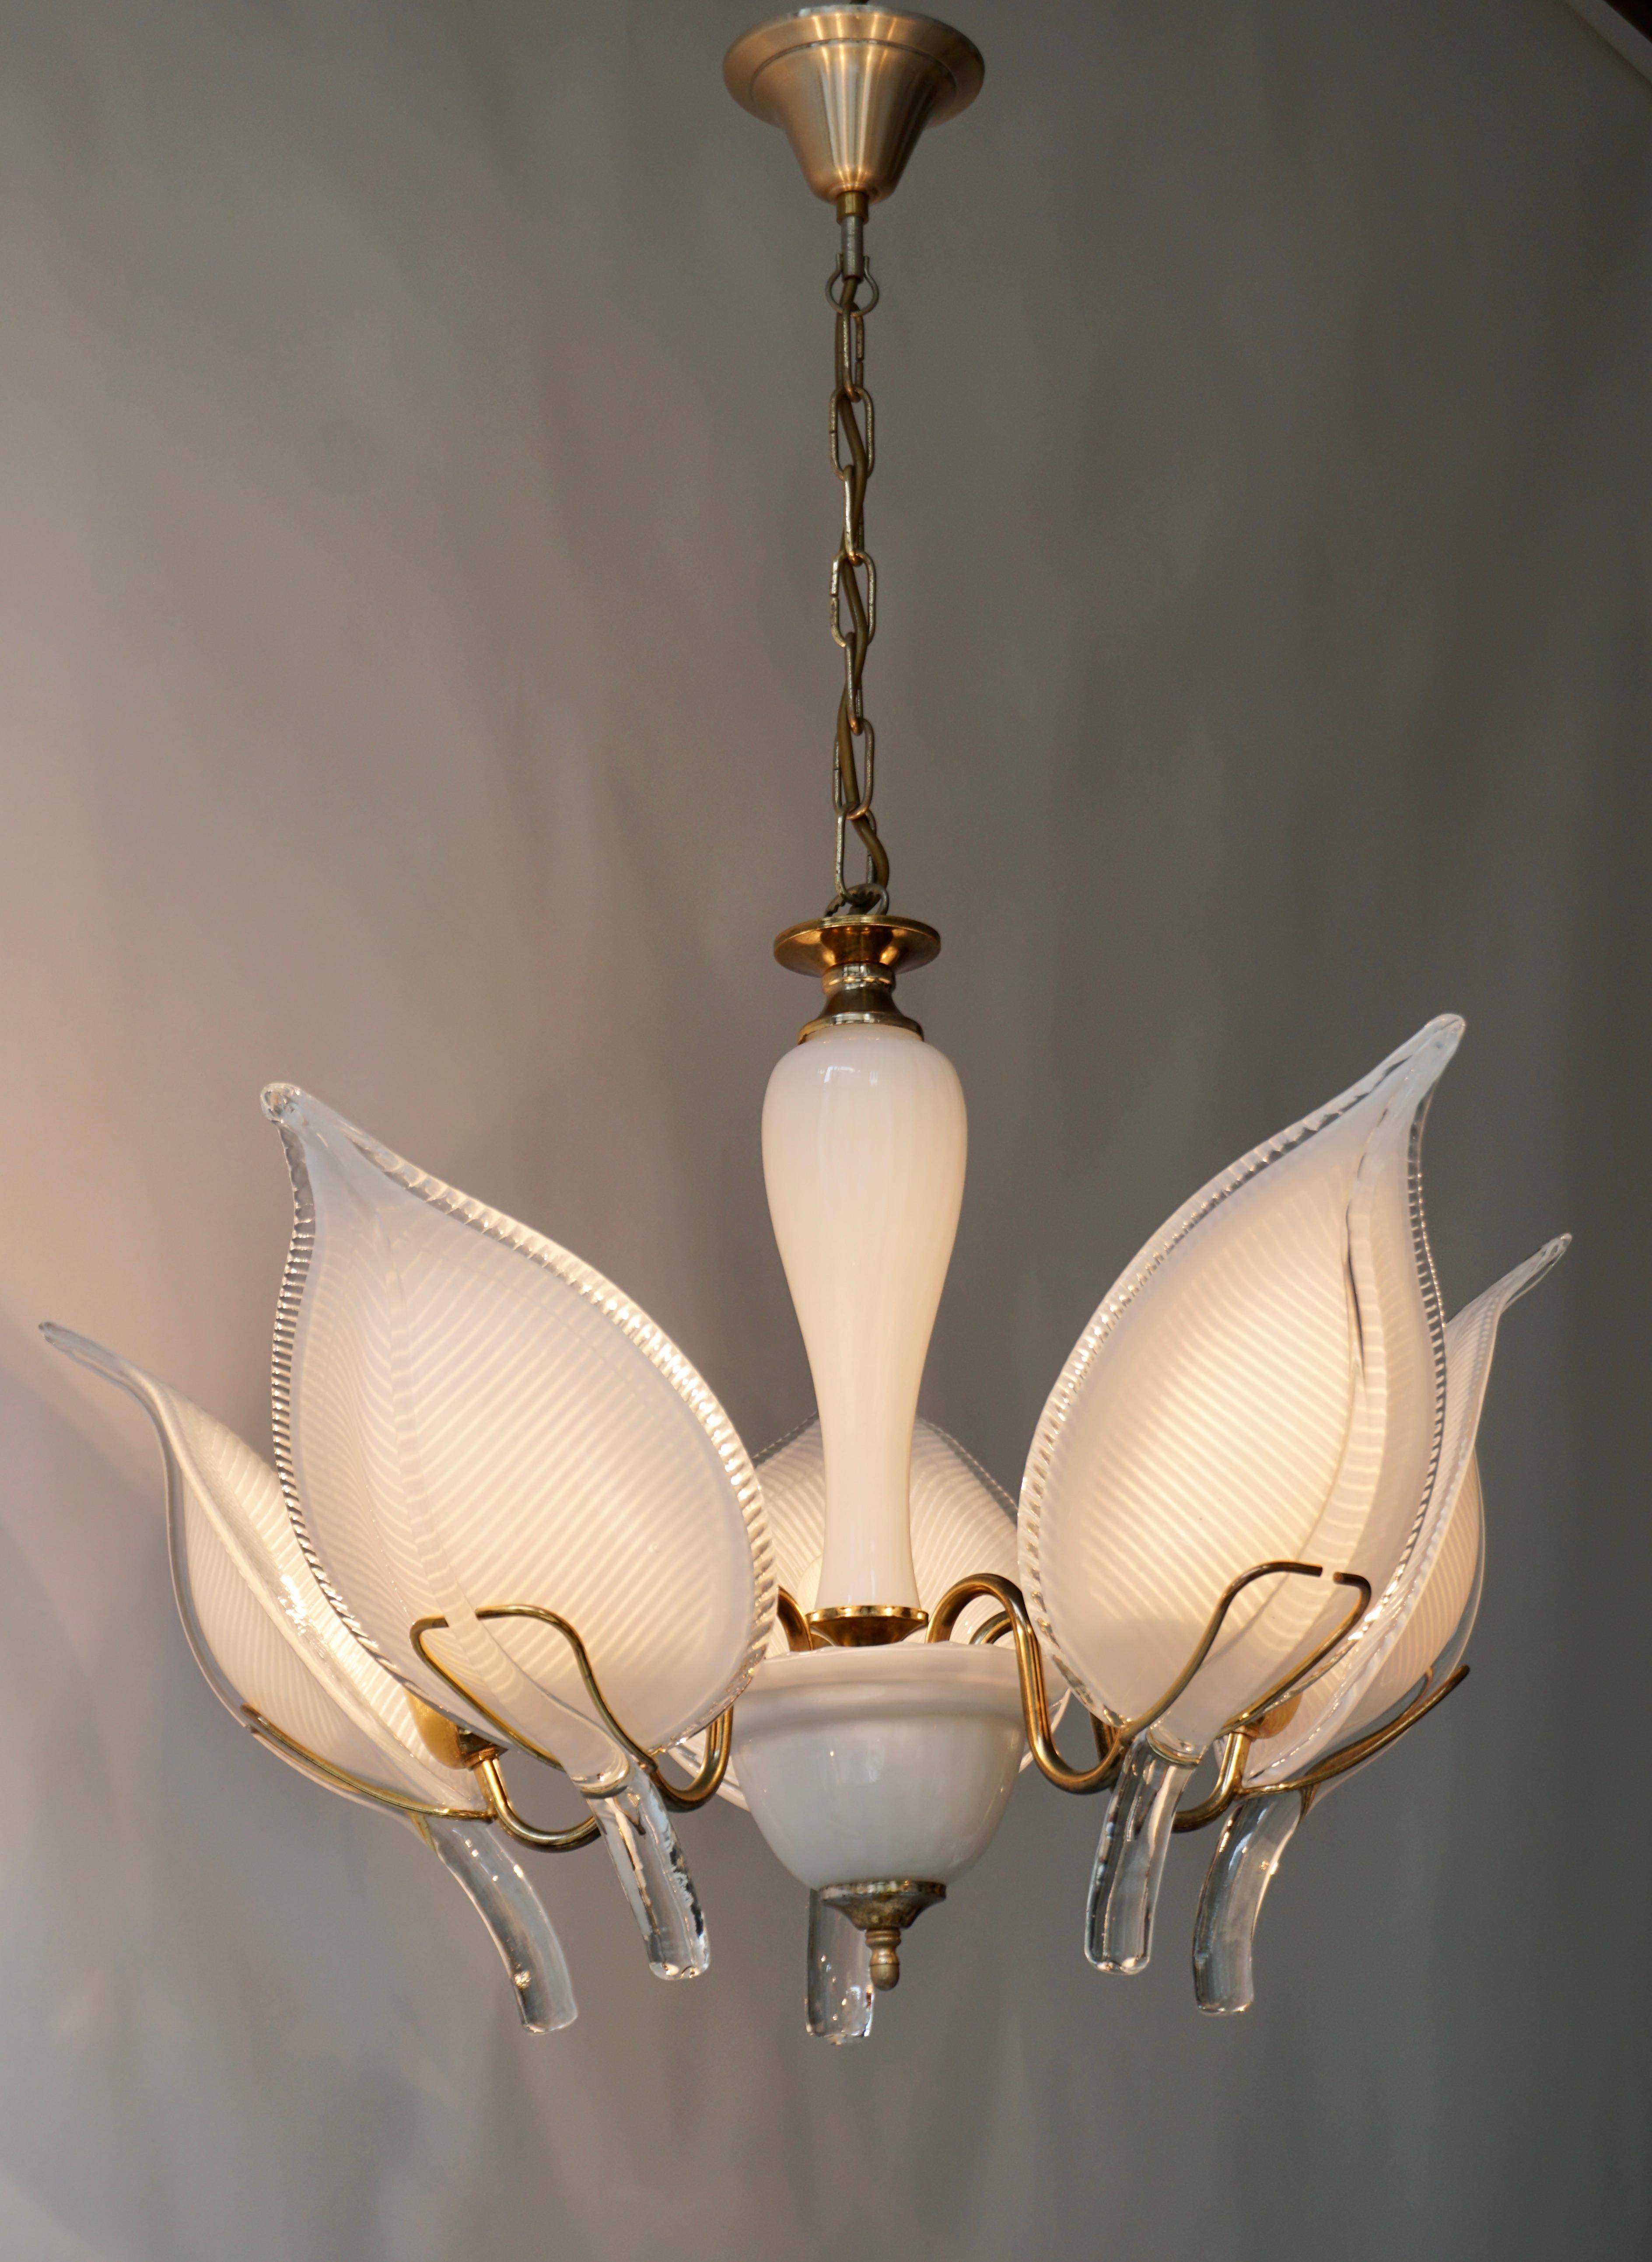 Mid-Century Modern Murano 5 leaf chandelier by Franco Luce. 

Great and wonderfully precious Murano chandelier in handblown glass leaves by the famous master designer Franco Luce. 
The light requires five single E27 screw fit lightbulbs (60Watt